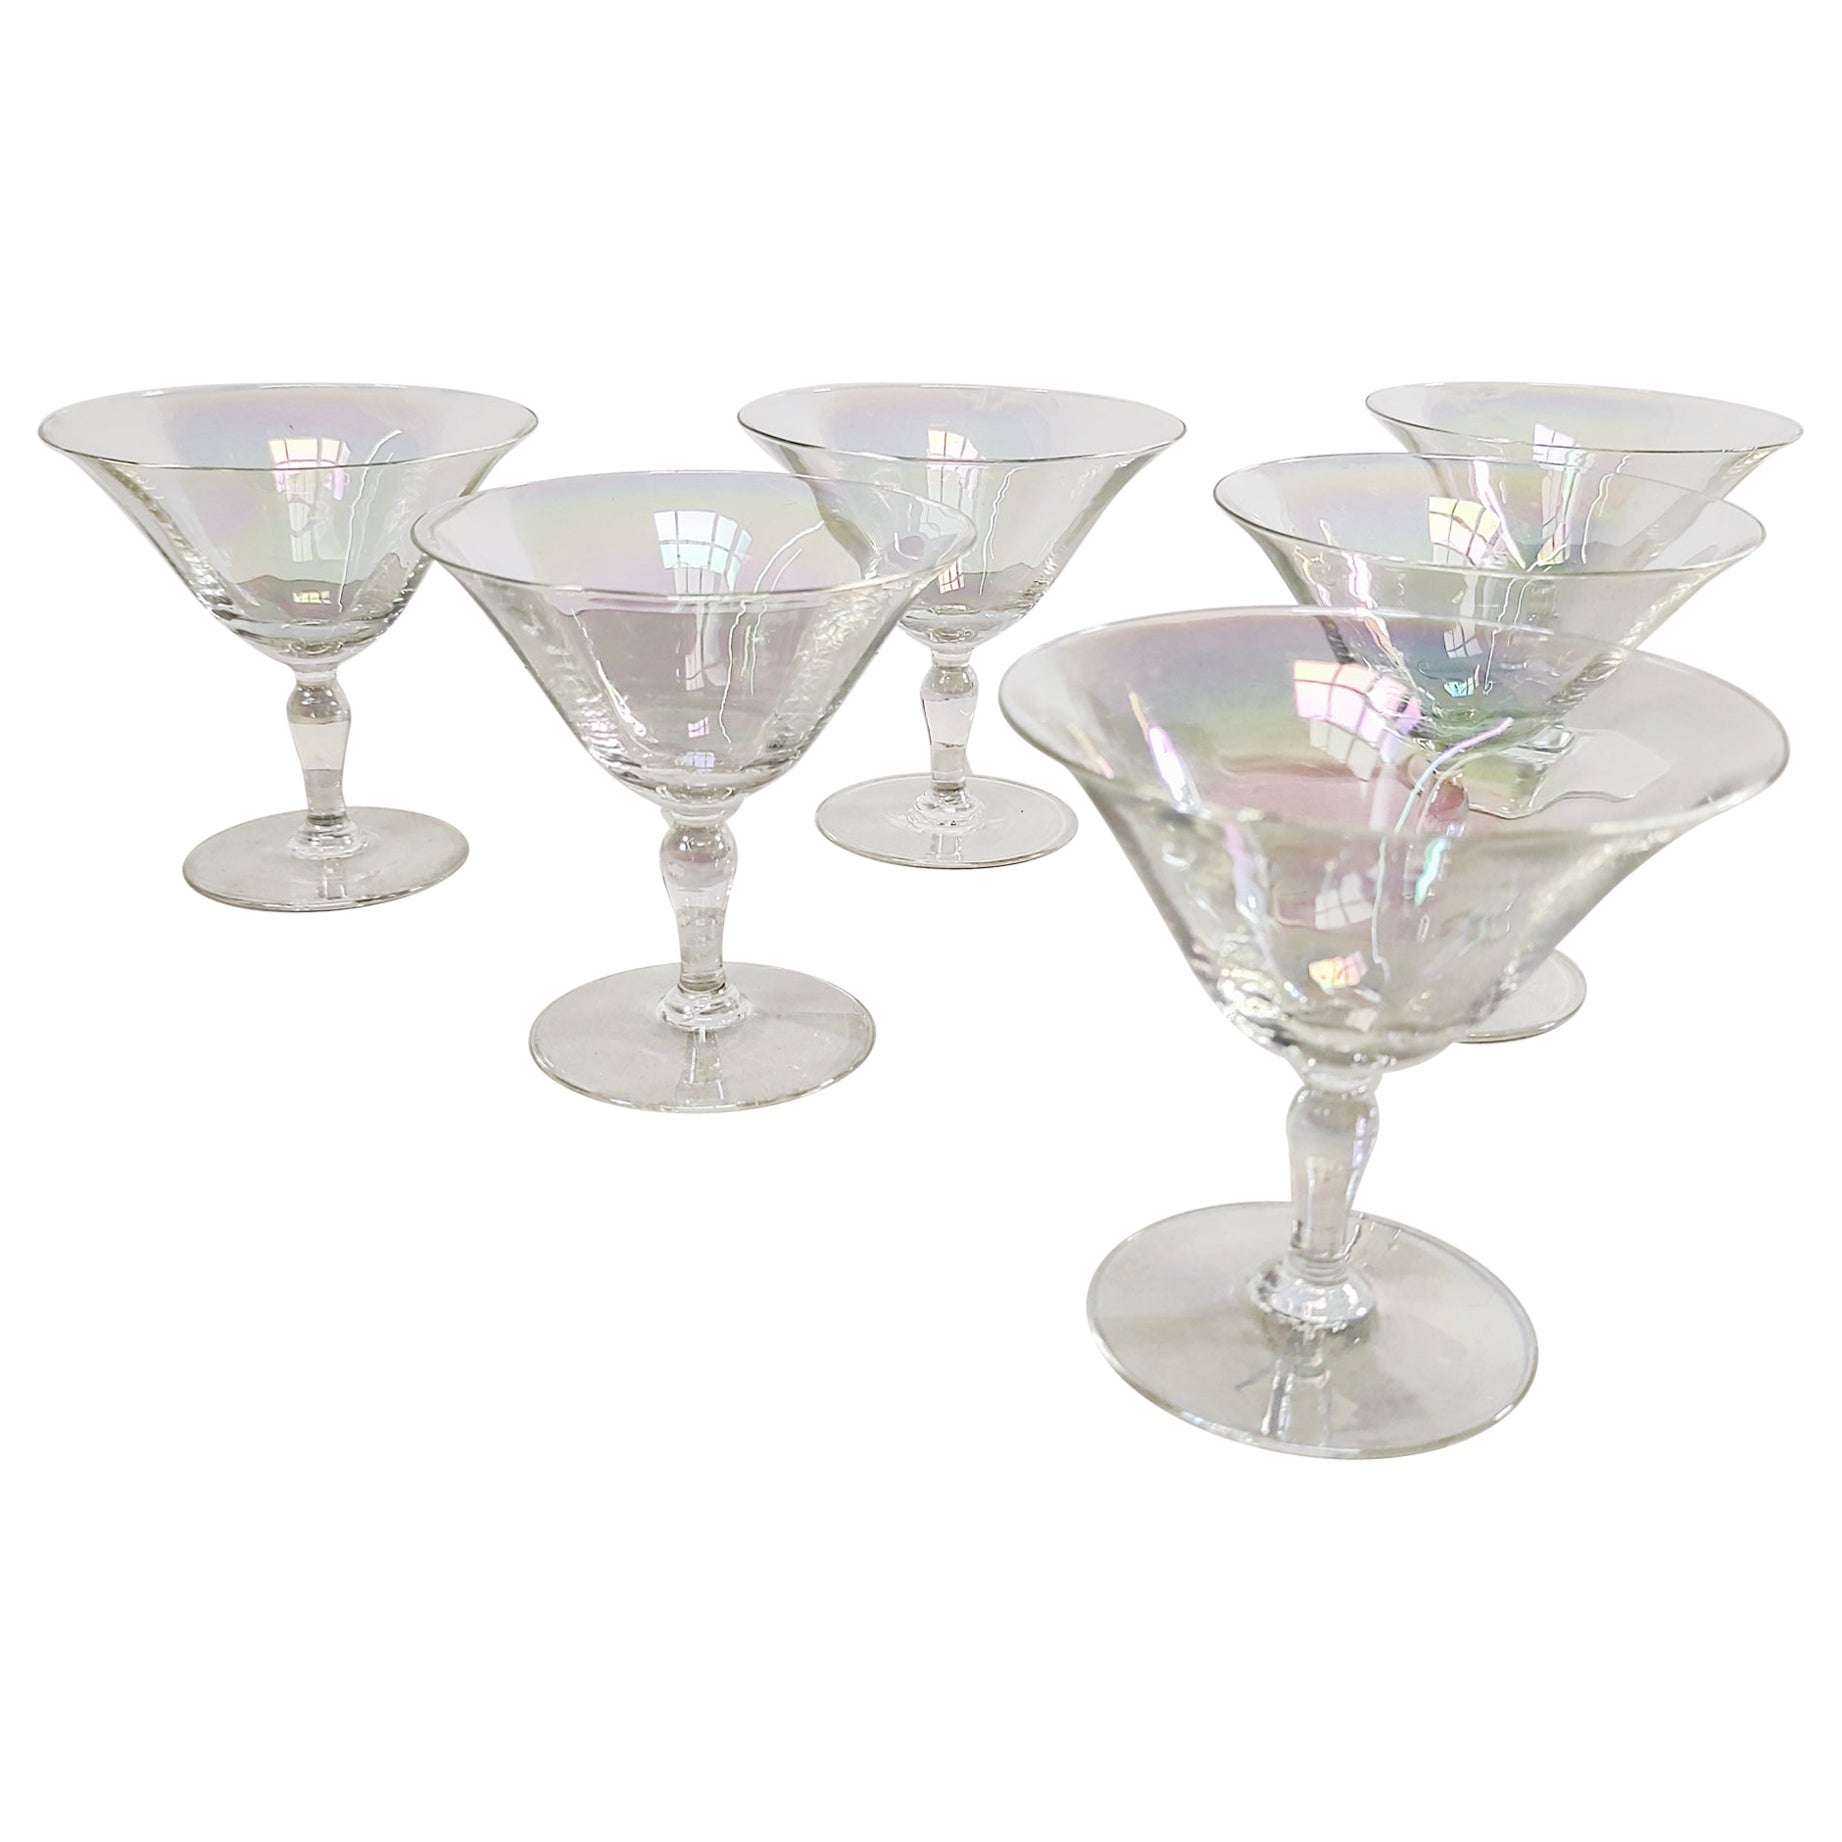 Set of 6 Vintage Hand Blown Iridescent Luster Tulip Coupe Glasses 1930s For Sale